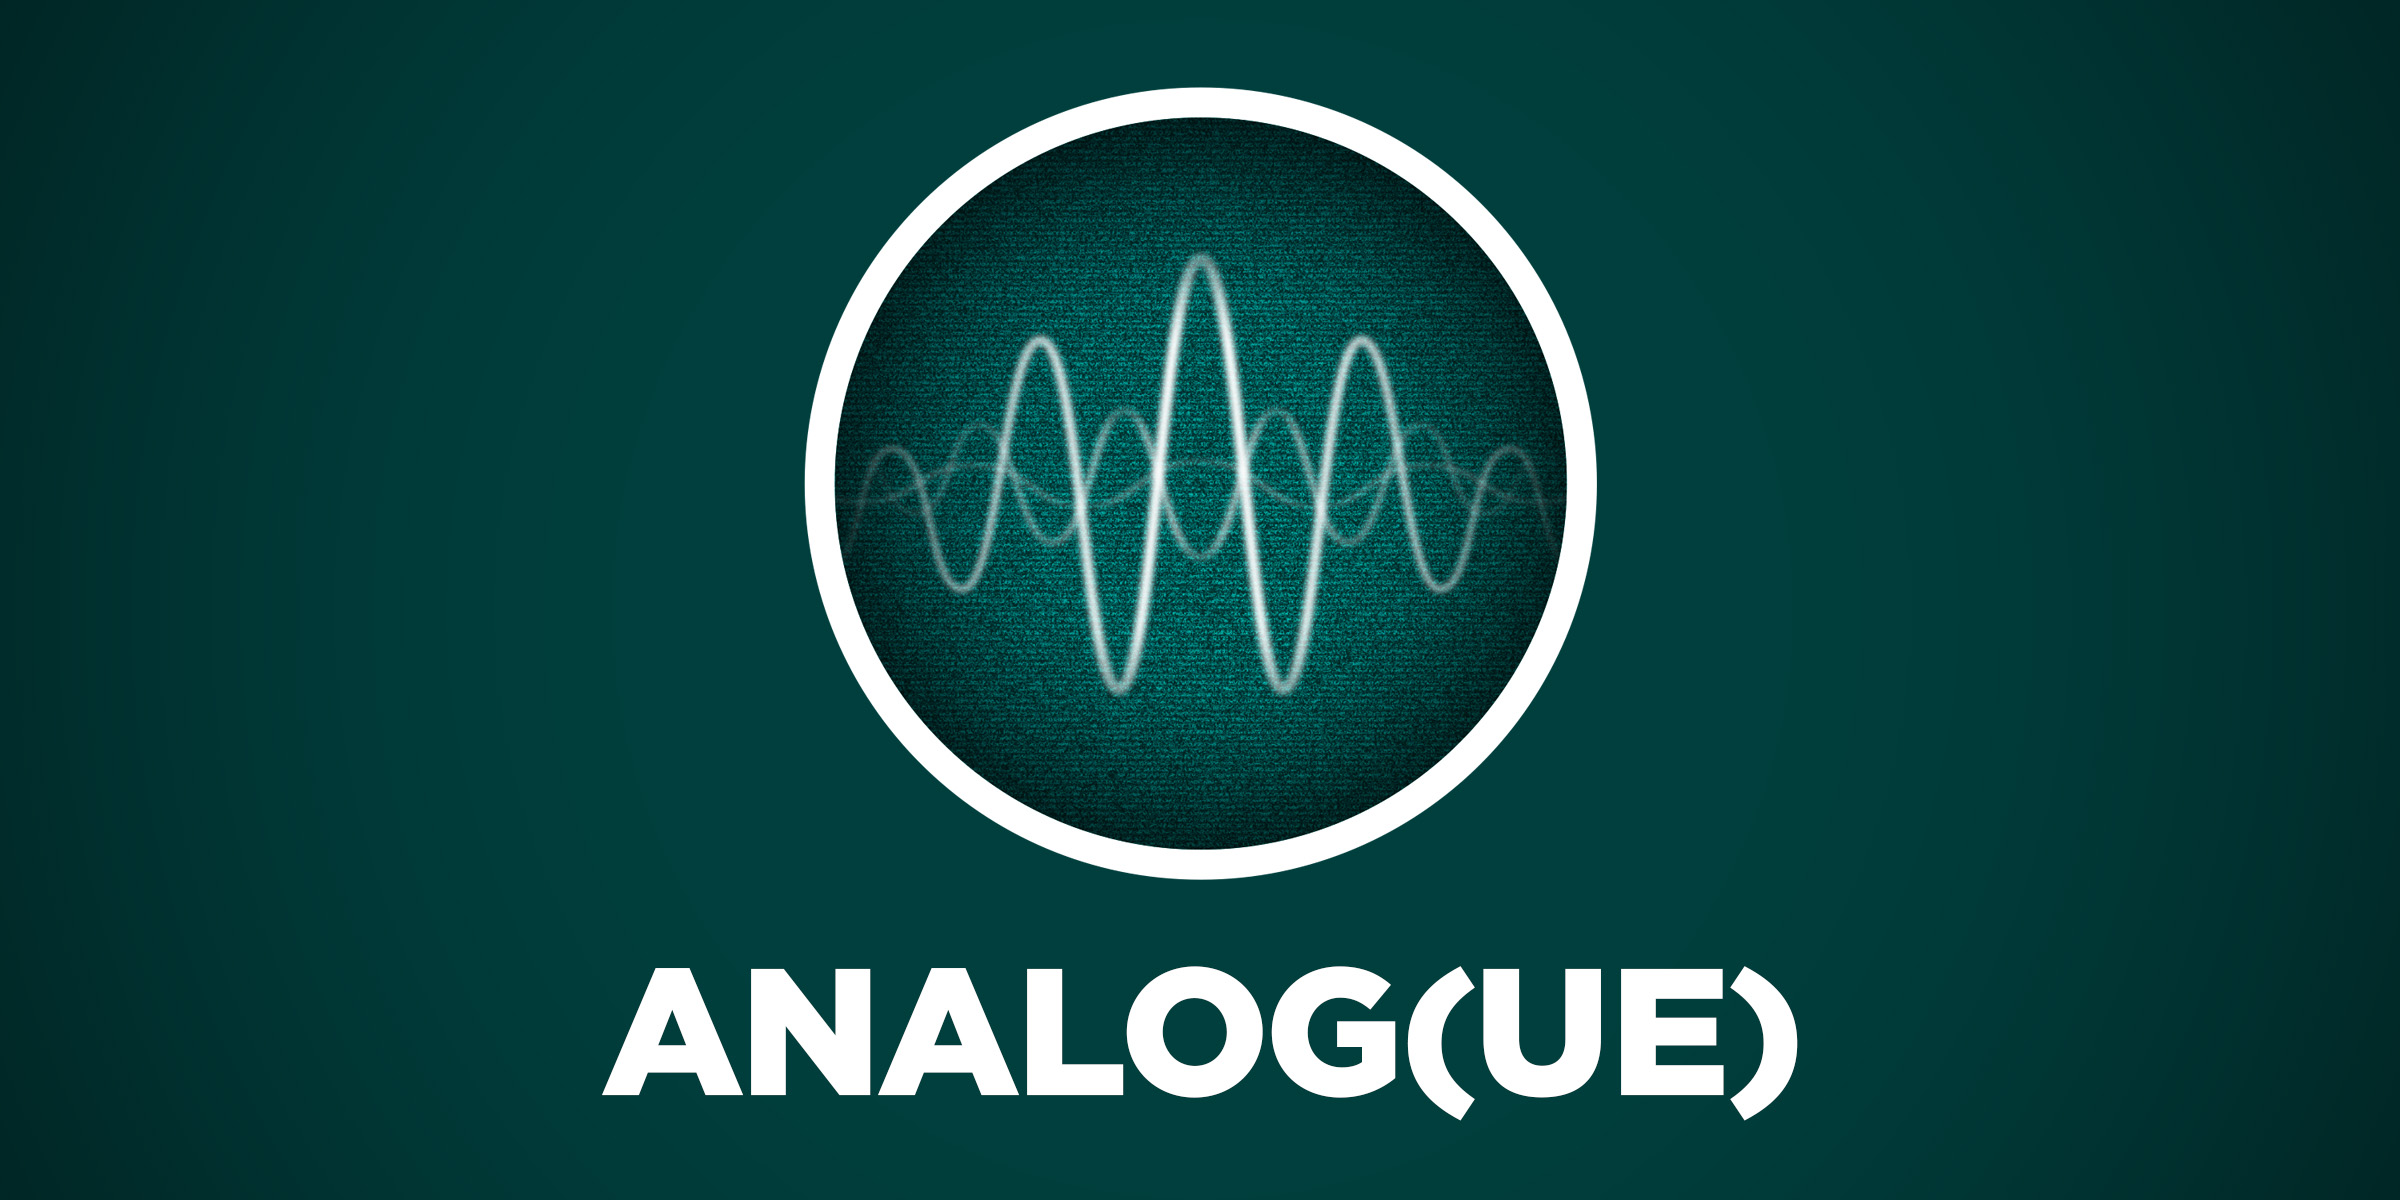 Analog(ue) #191: A Bit of a Wobbly Moment